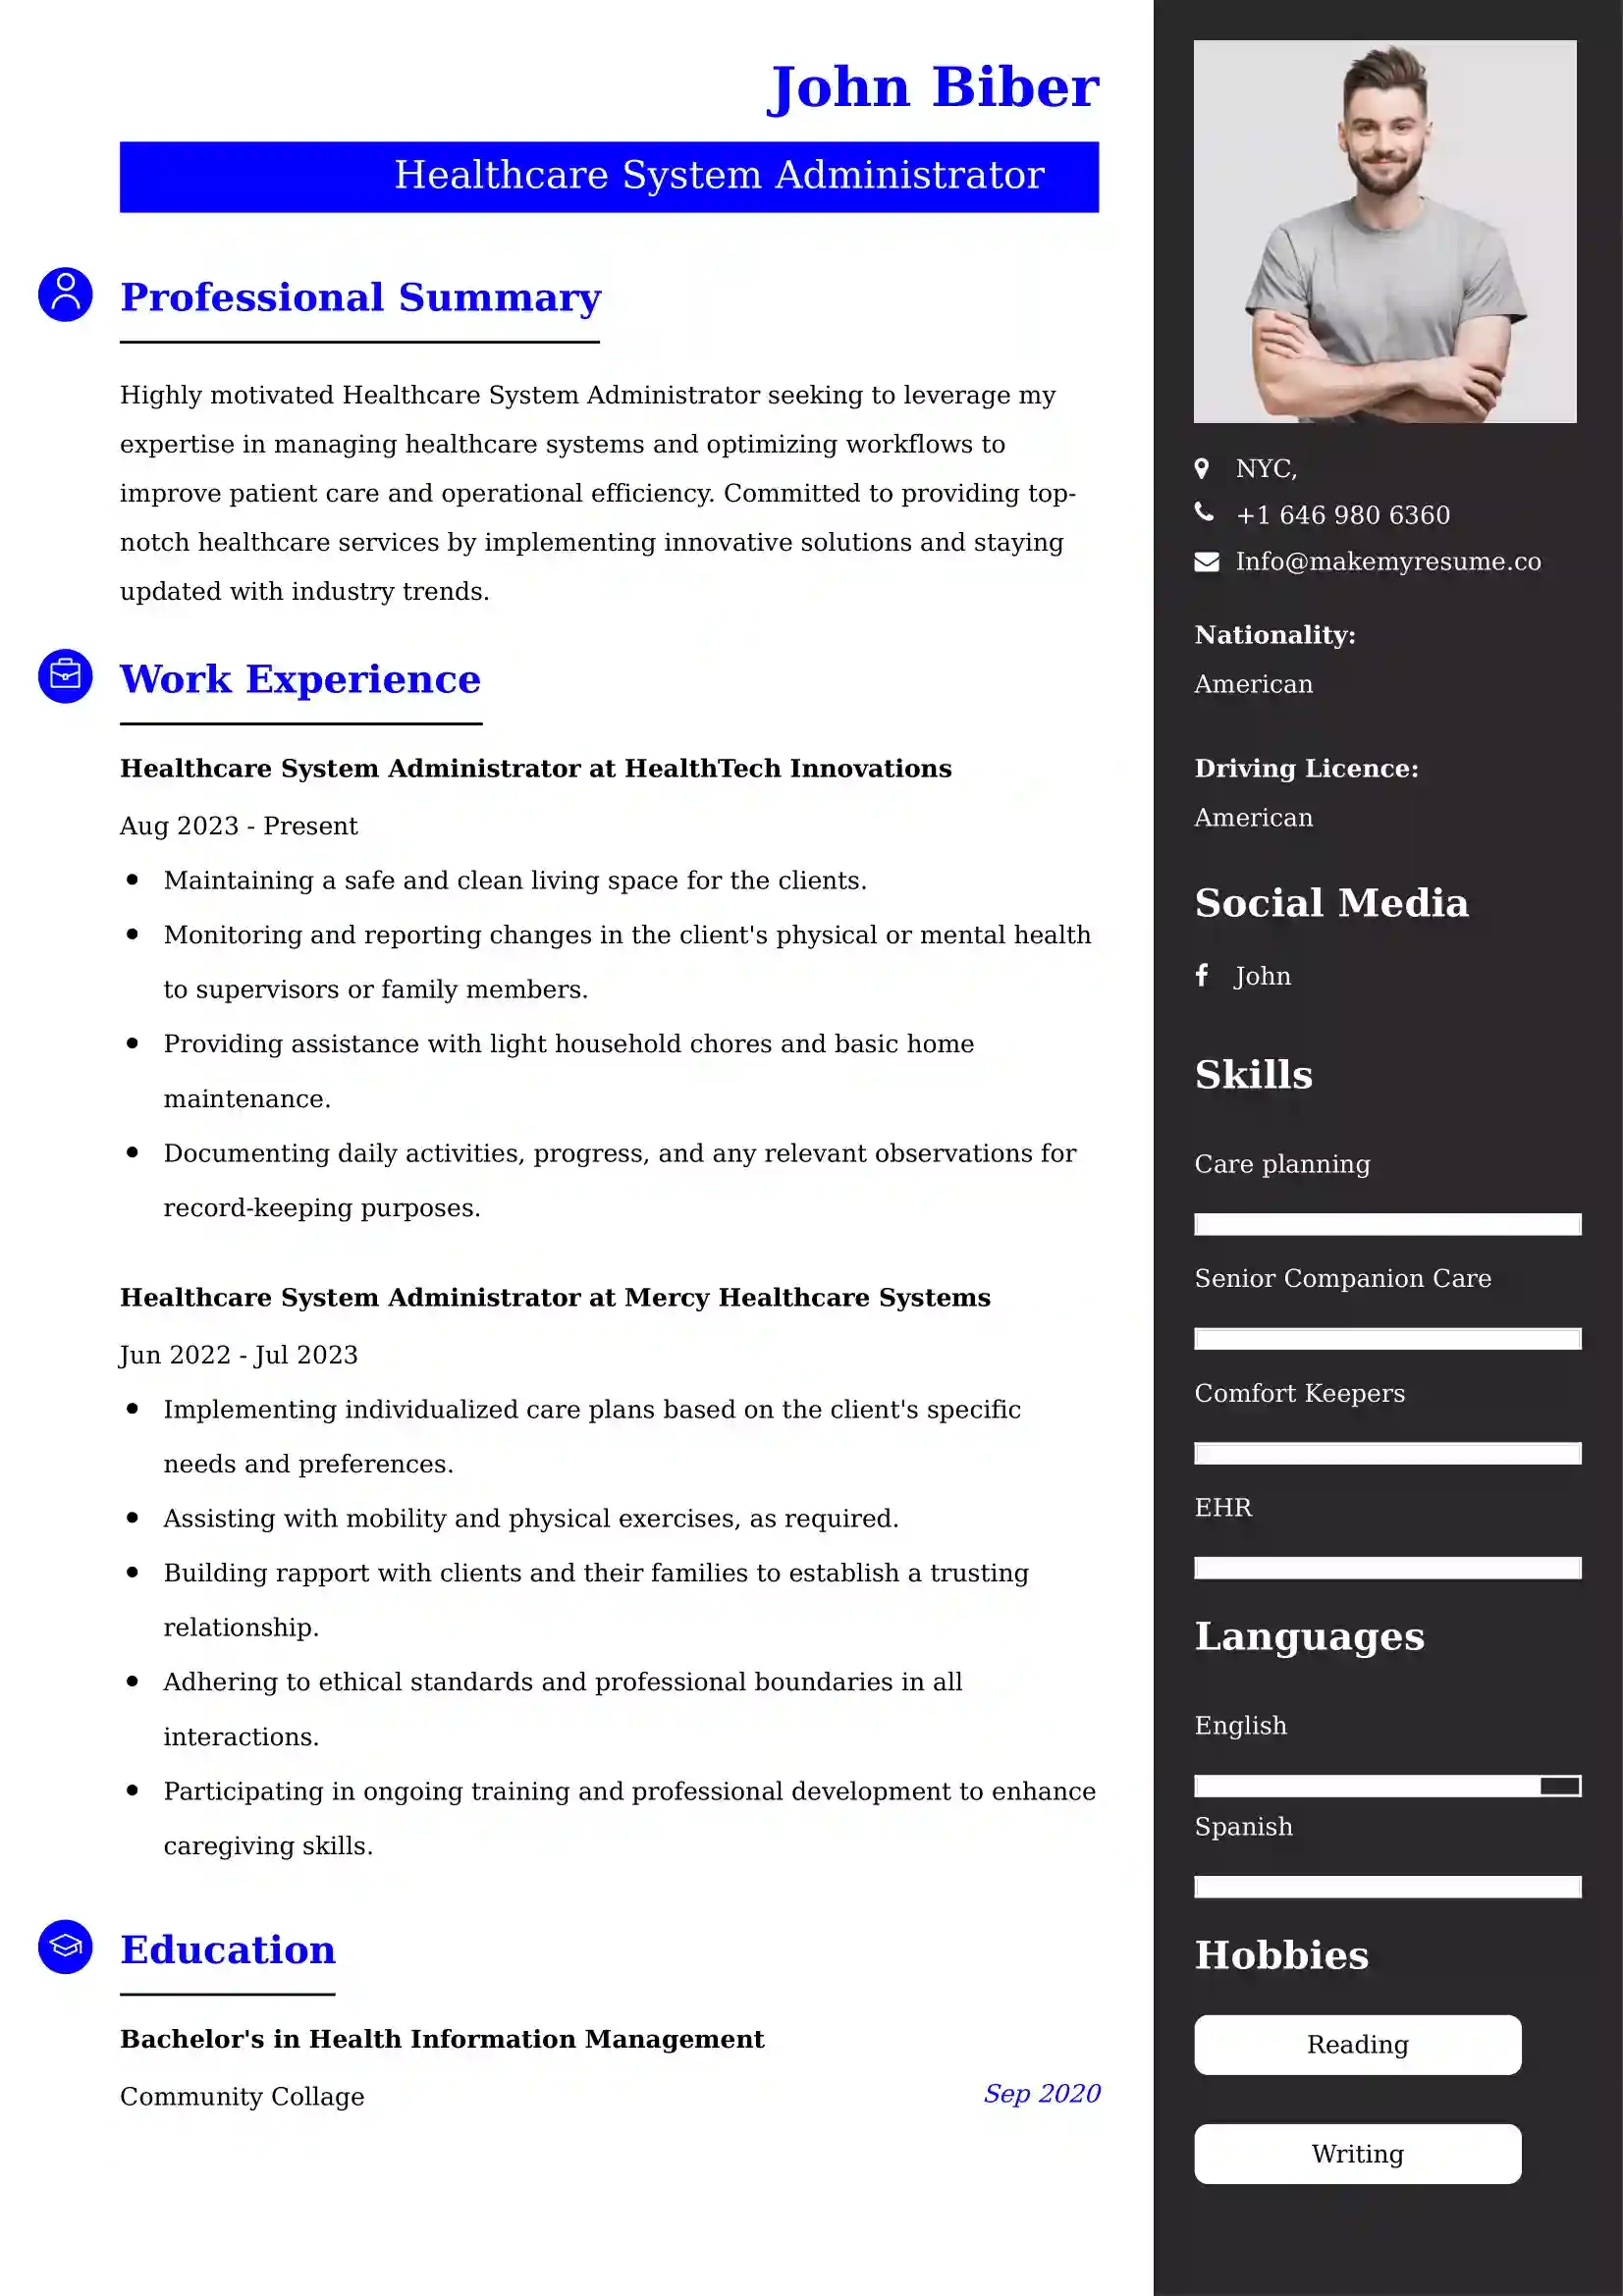 Healthcare System Administrator Resume Examples - UK Format, Latest Template.